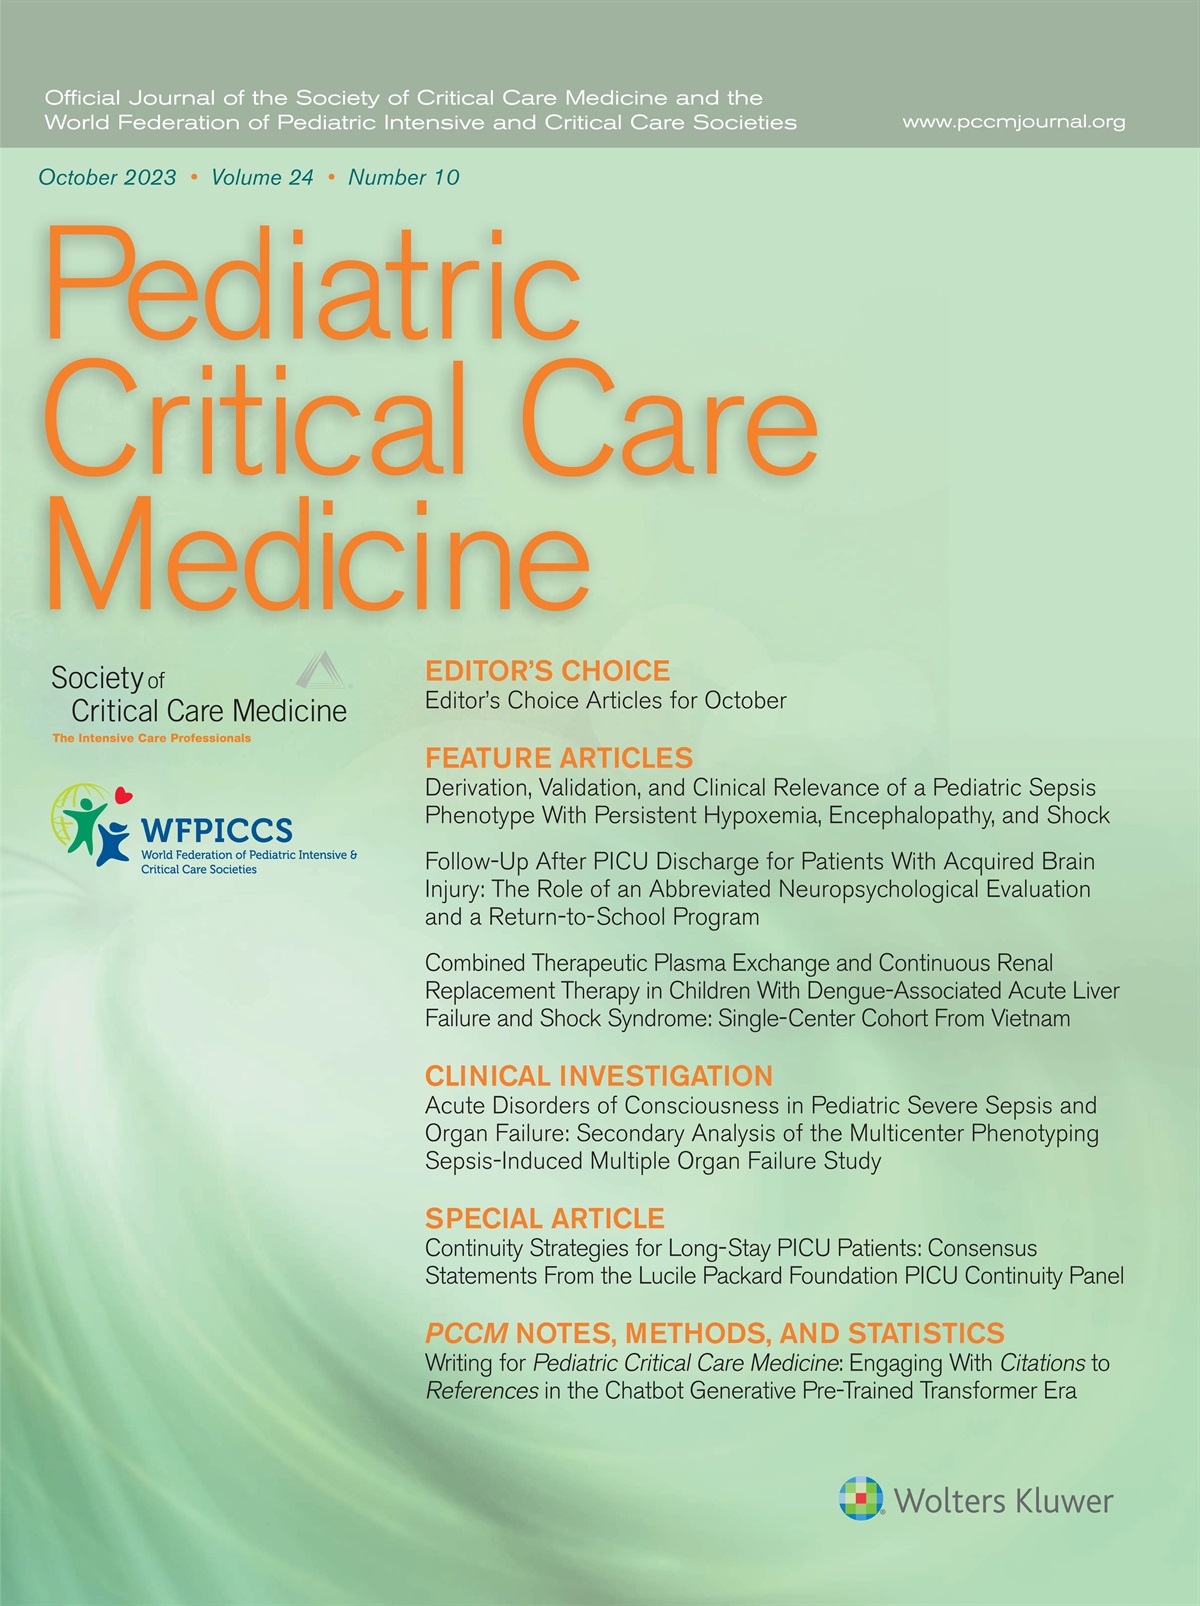 Building Bridges: Integration of PICU Follow-Up With Aftercare in the Community*